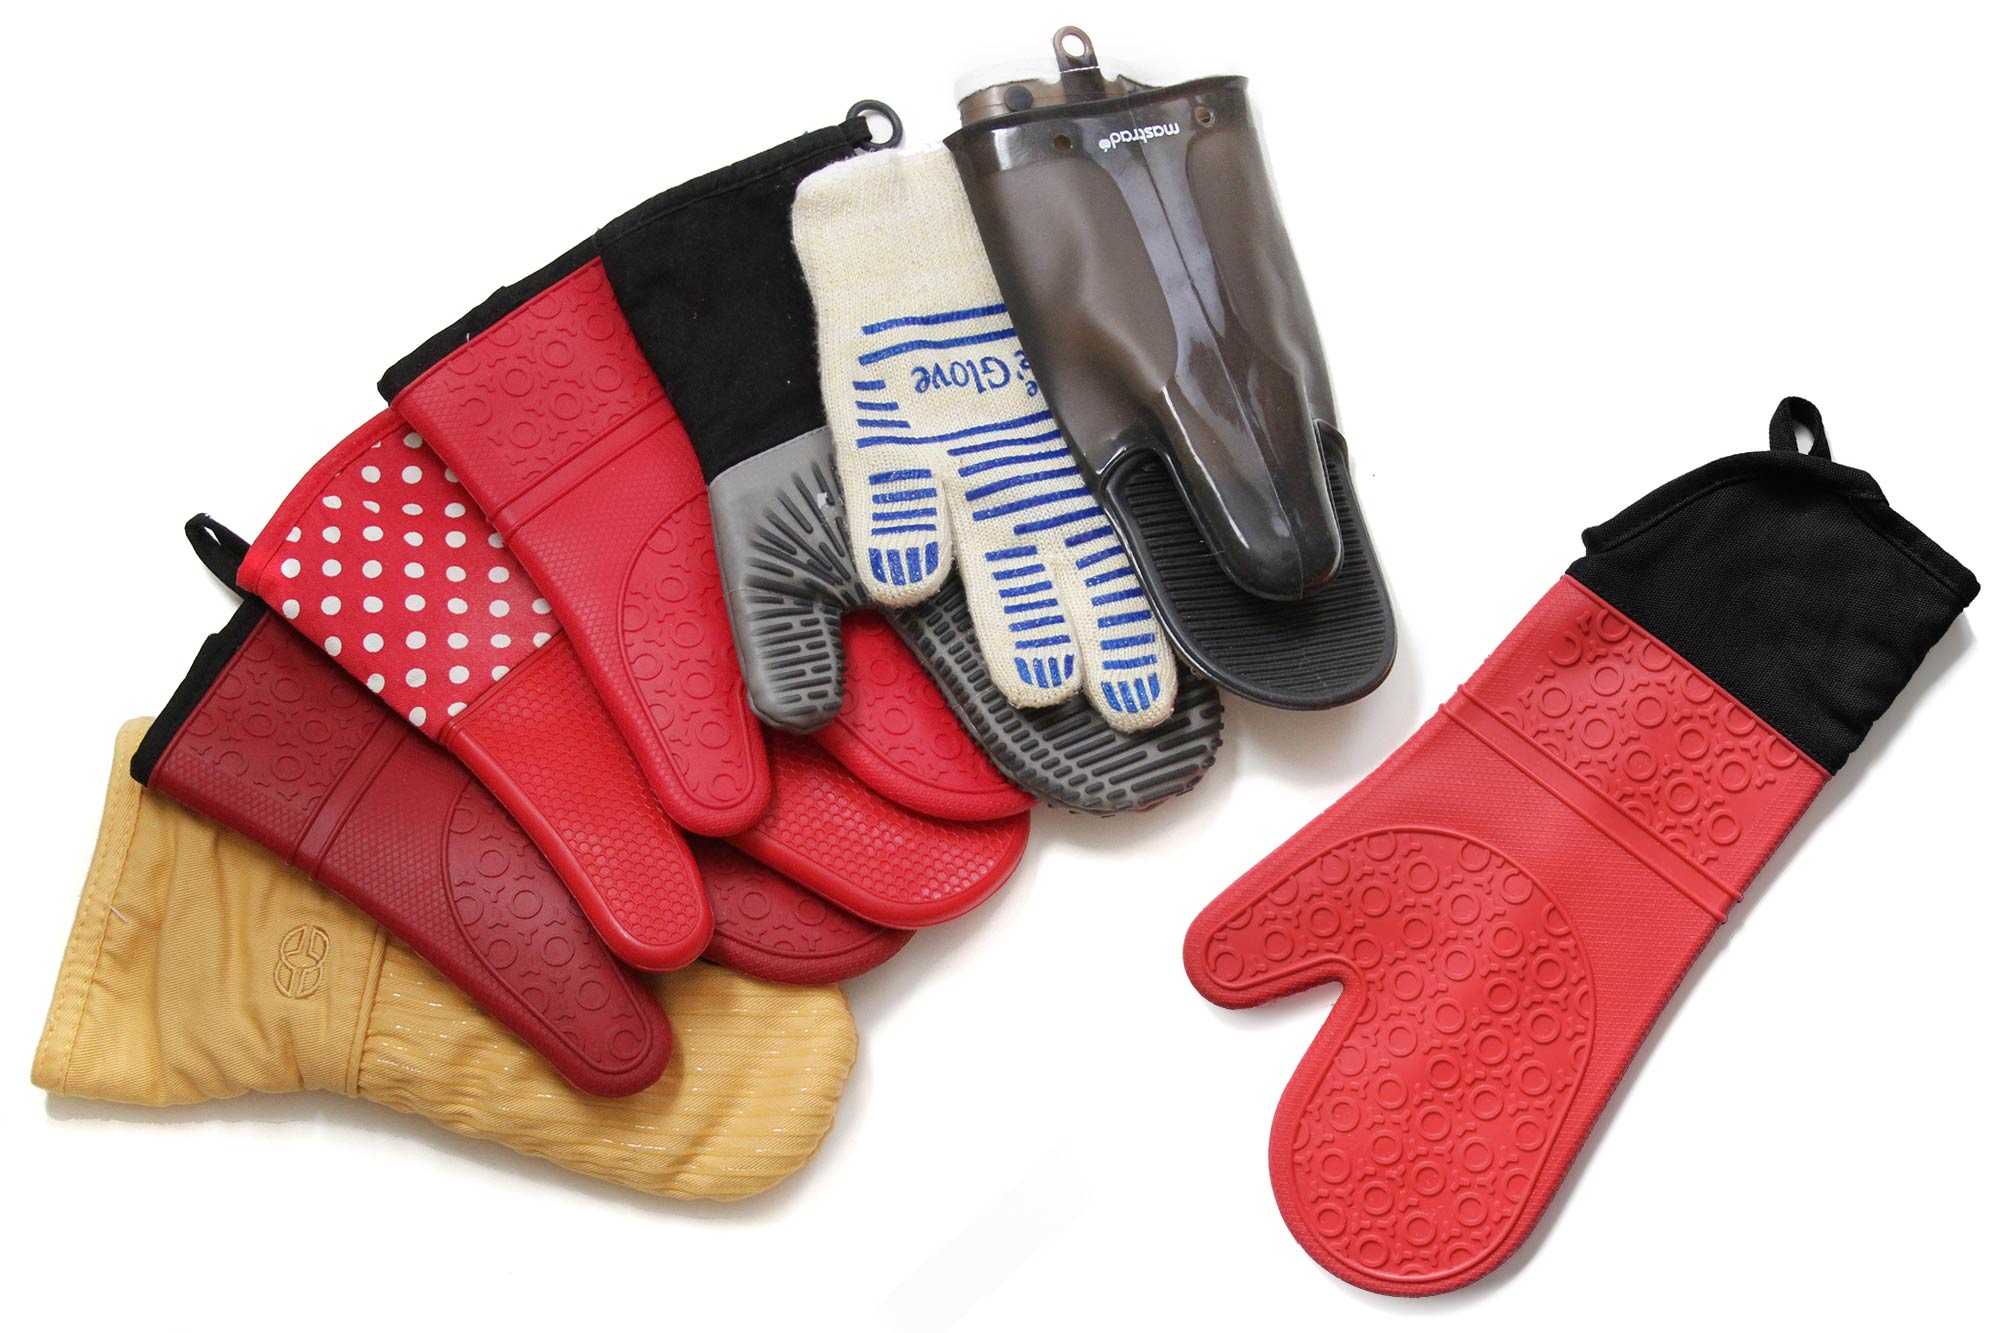 Heavy Duty Oven Mitts Microwave Stove Gloves Hands Fingers Mitten Protectors 